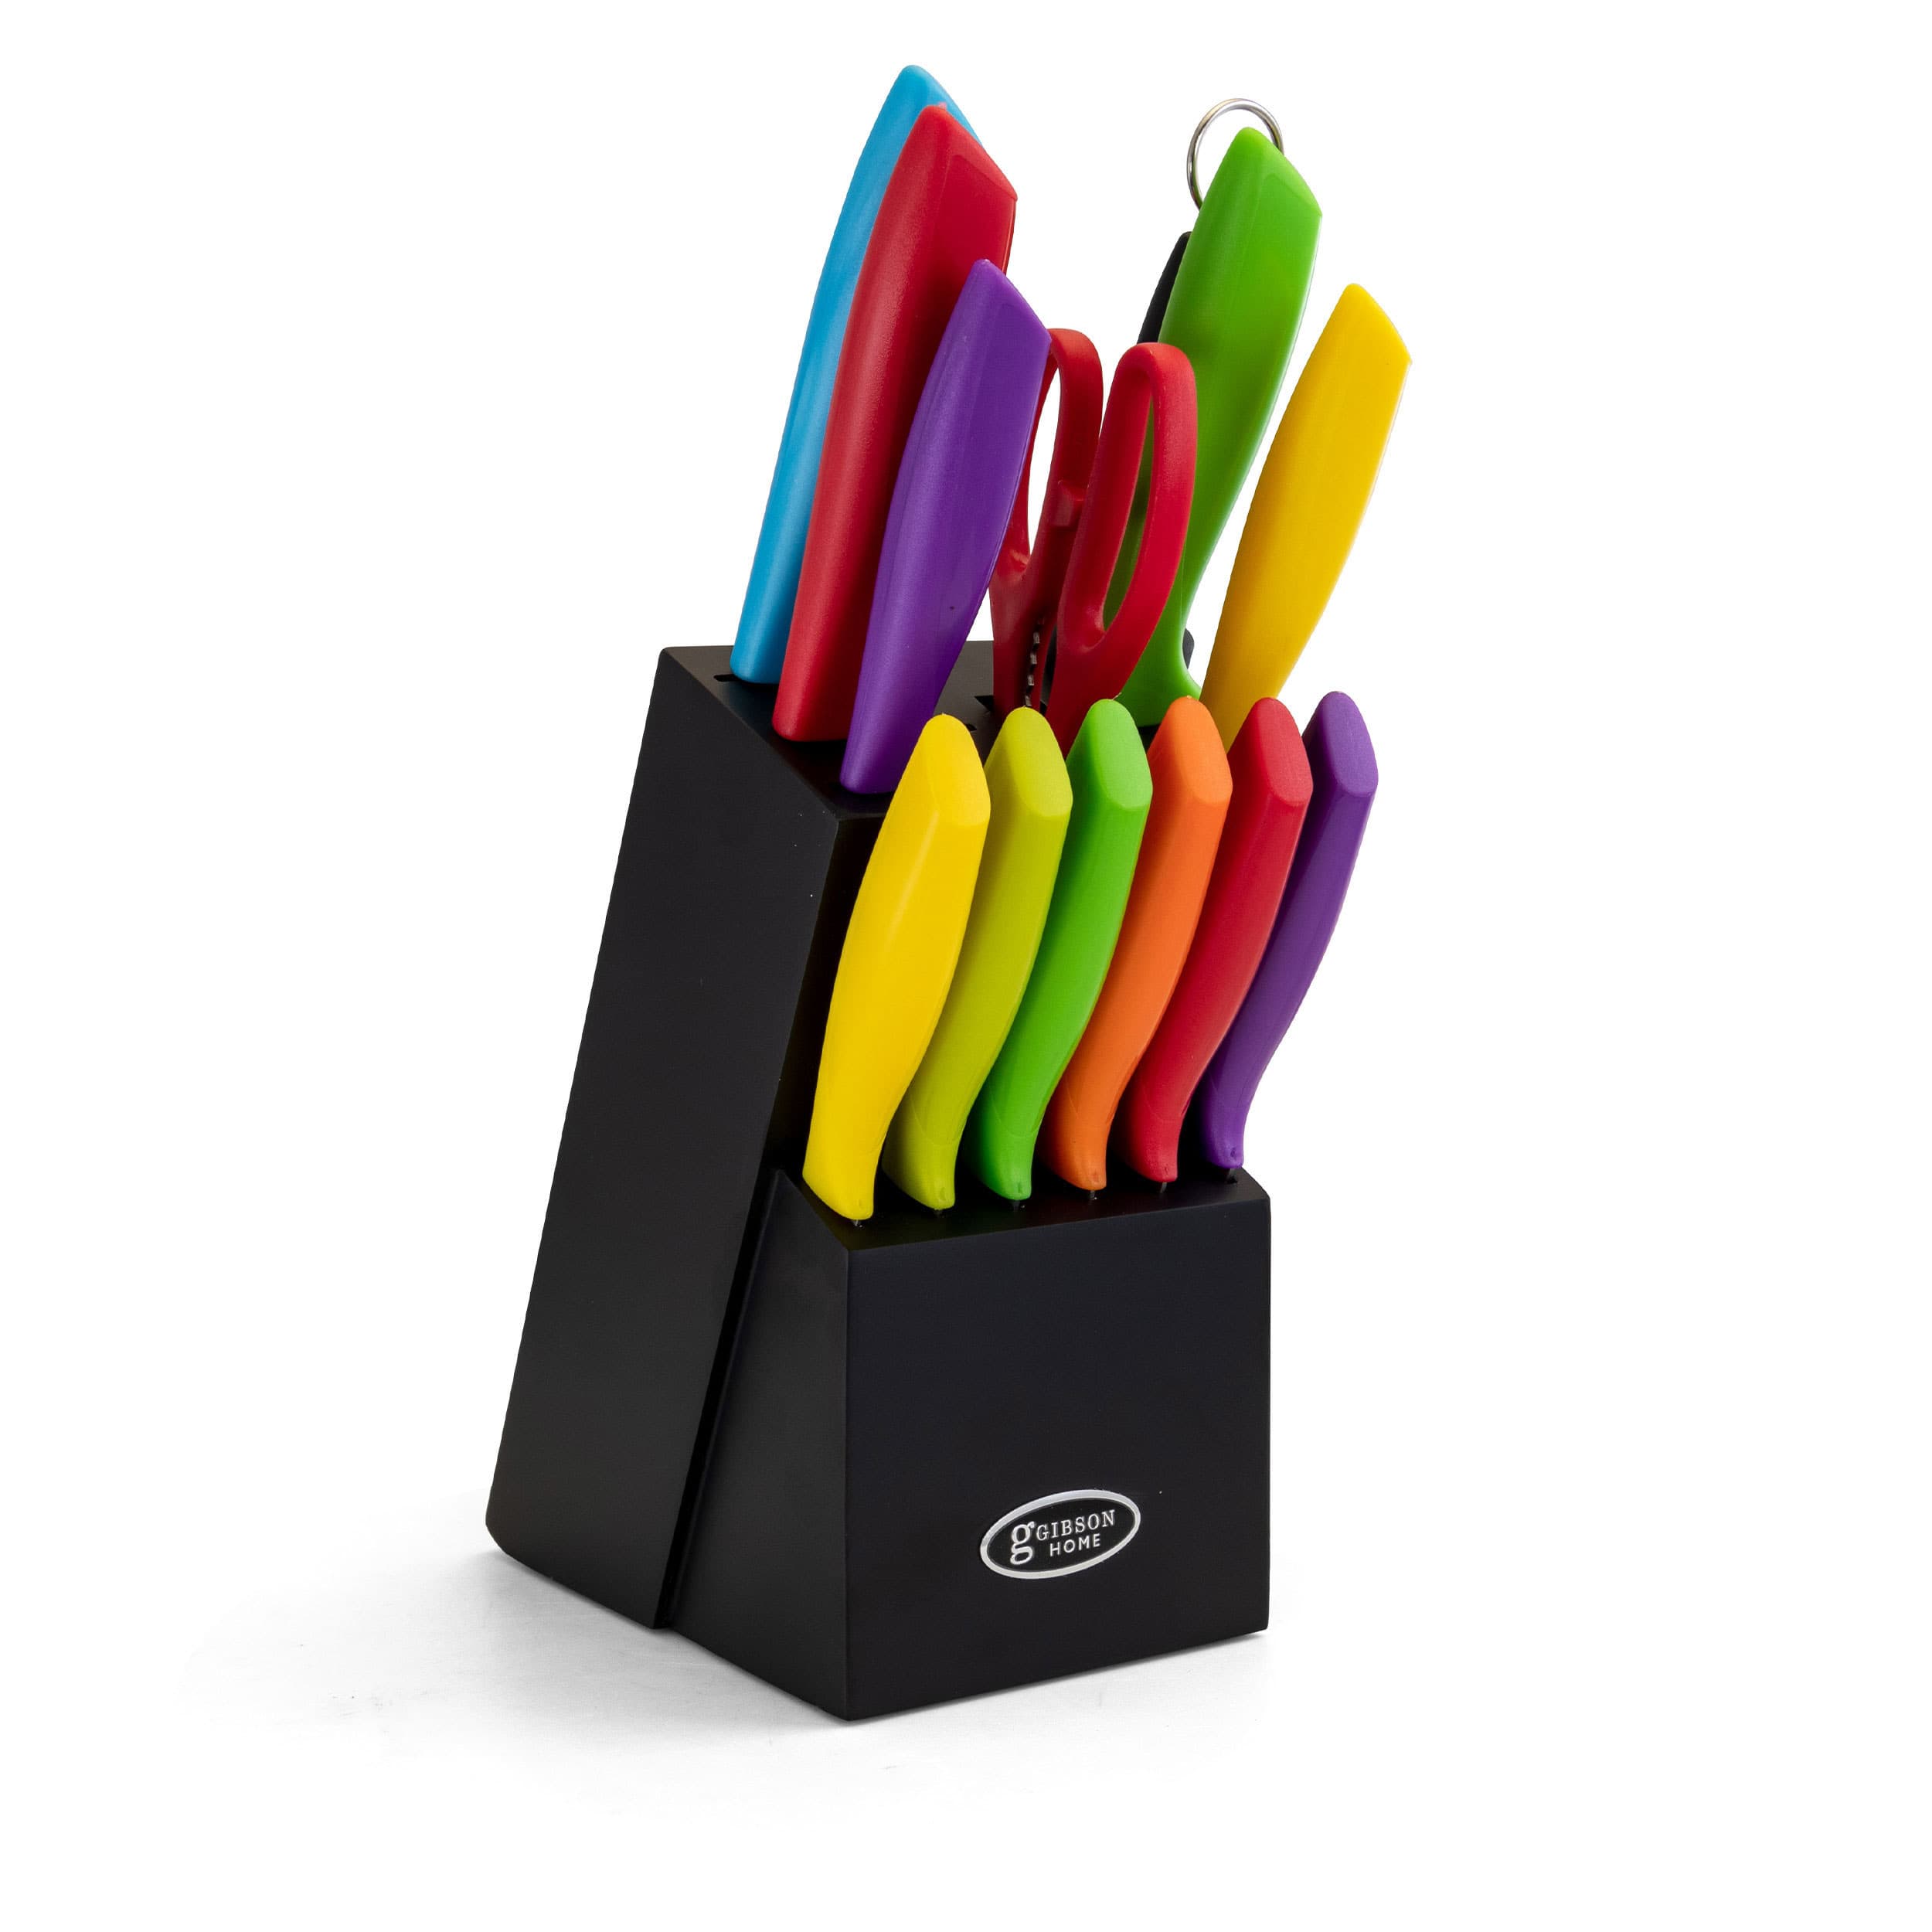 Gibson Home Color Vibes 14-Piece Cutlery Knife Set